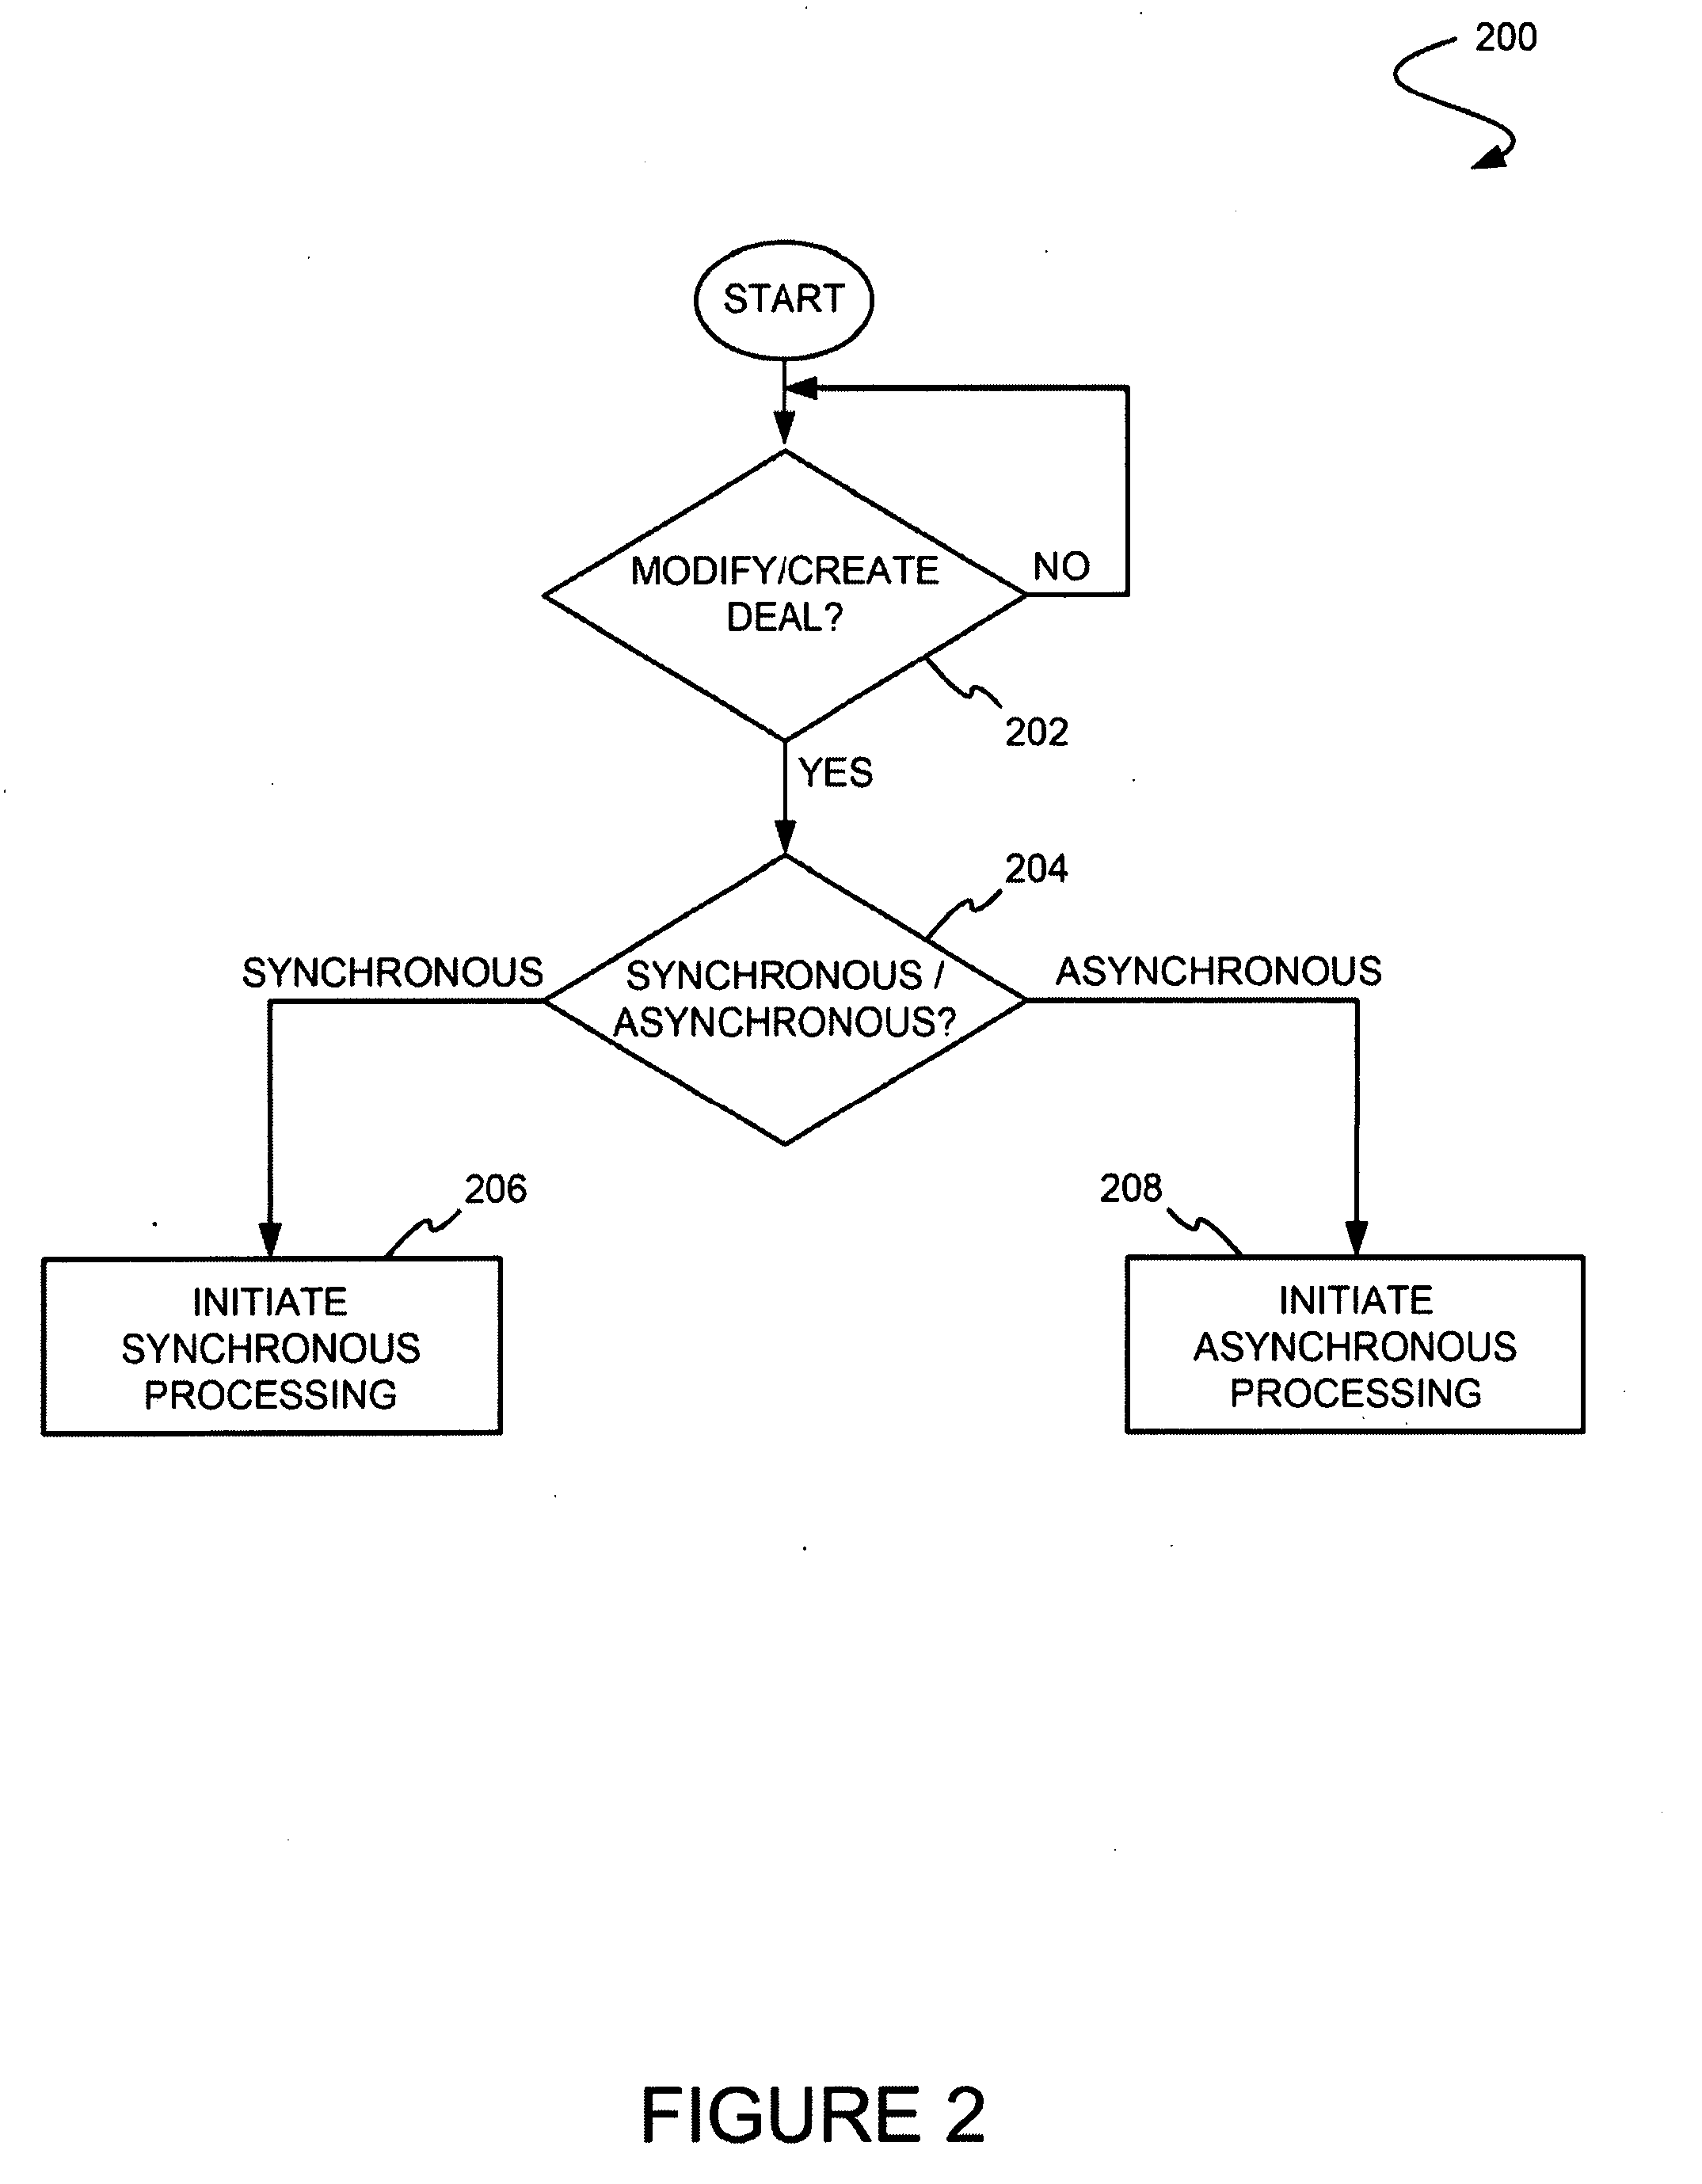 Method and system for selecting a synchronous or asynchronous process to determine a forecast